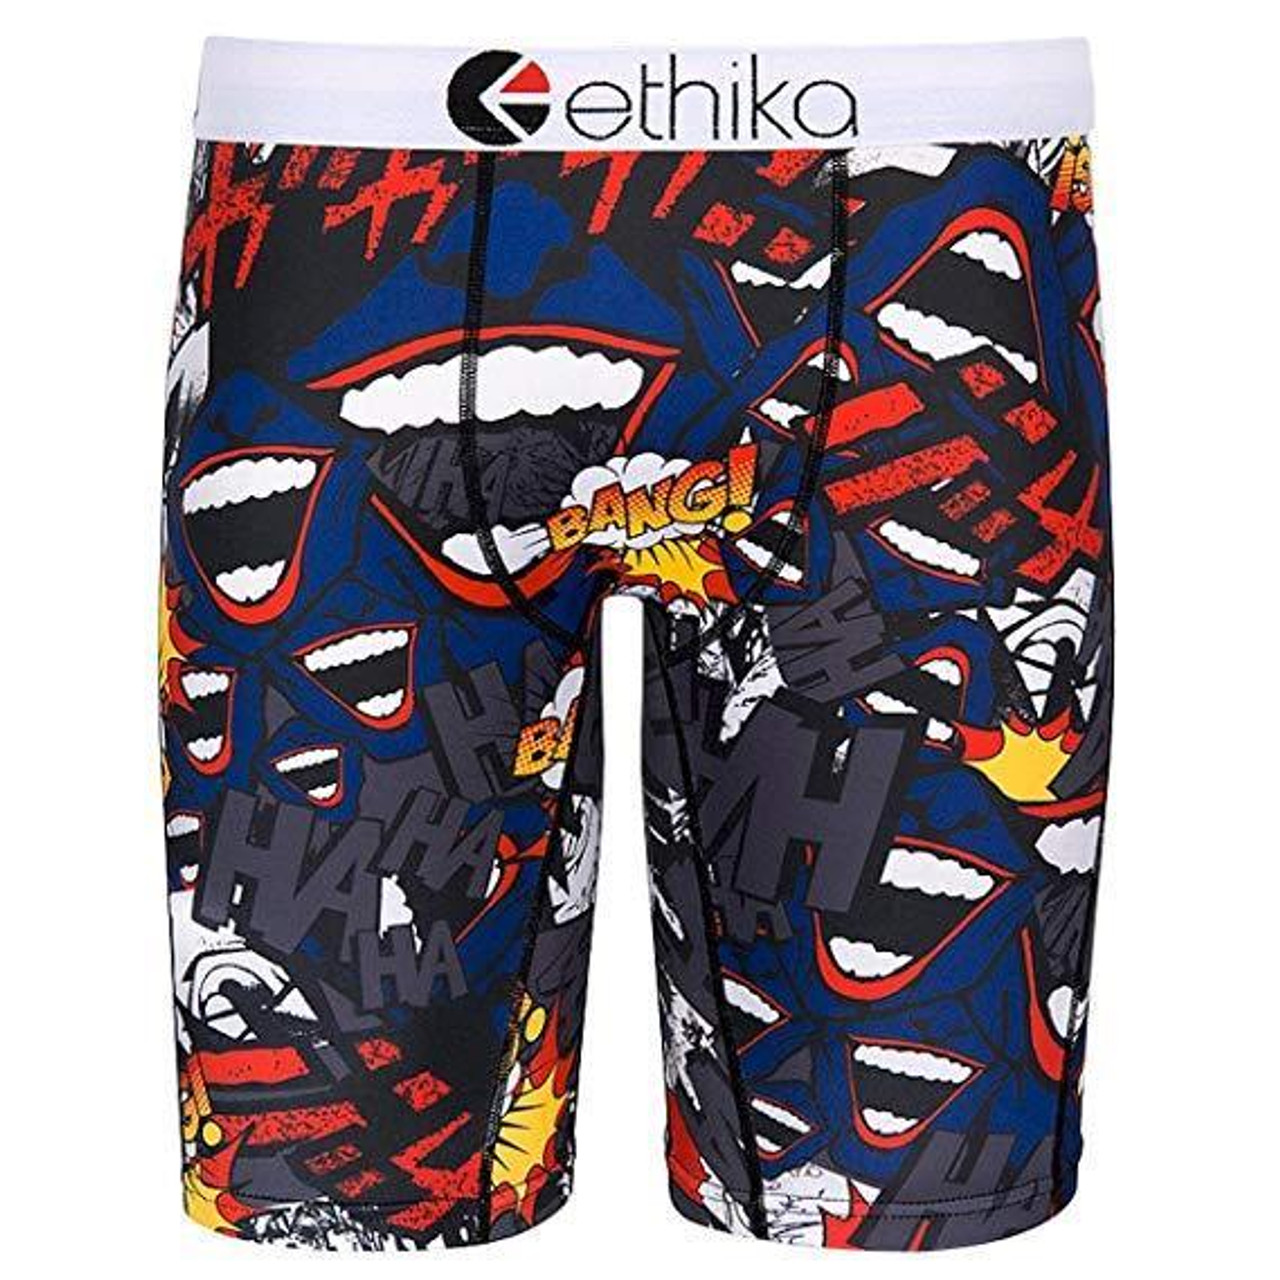 Ethika Posters for Sale